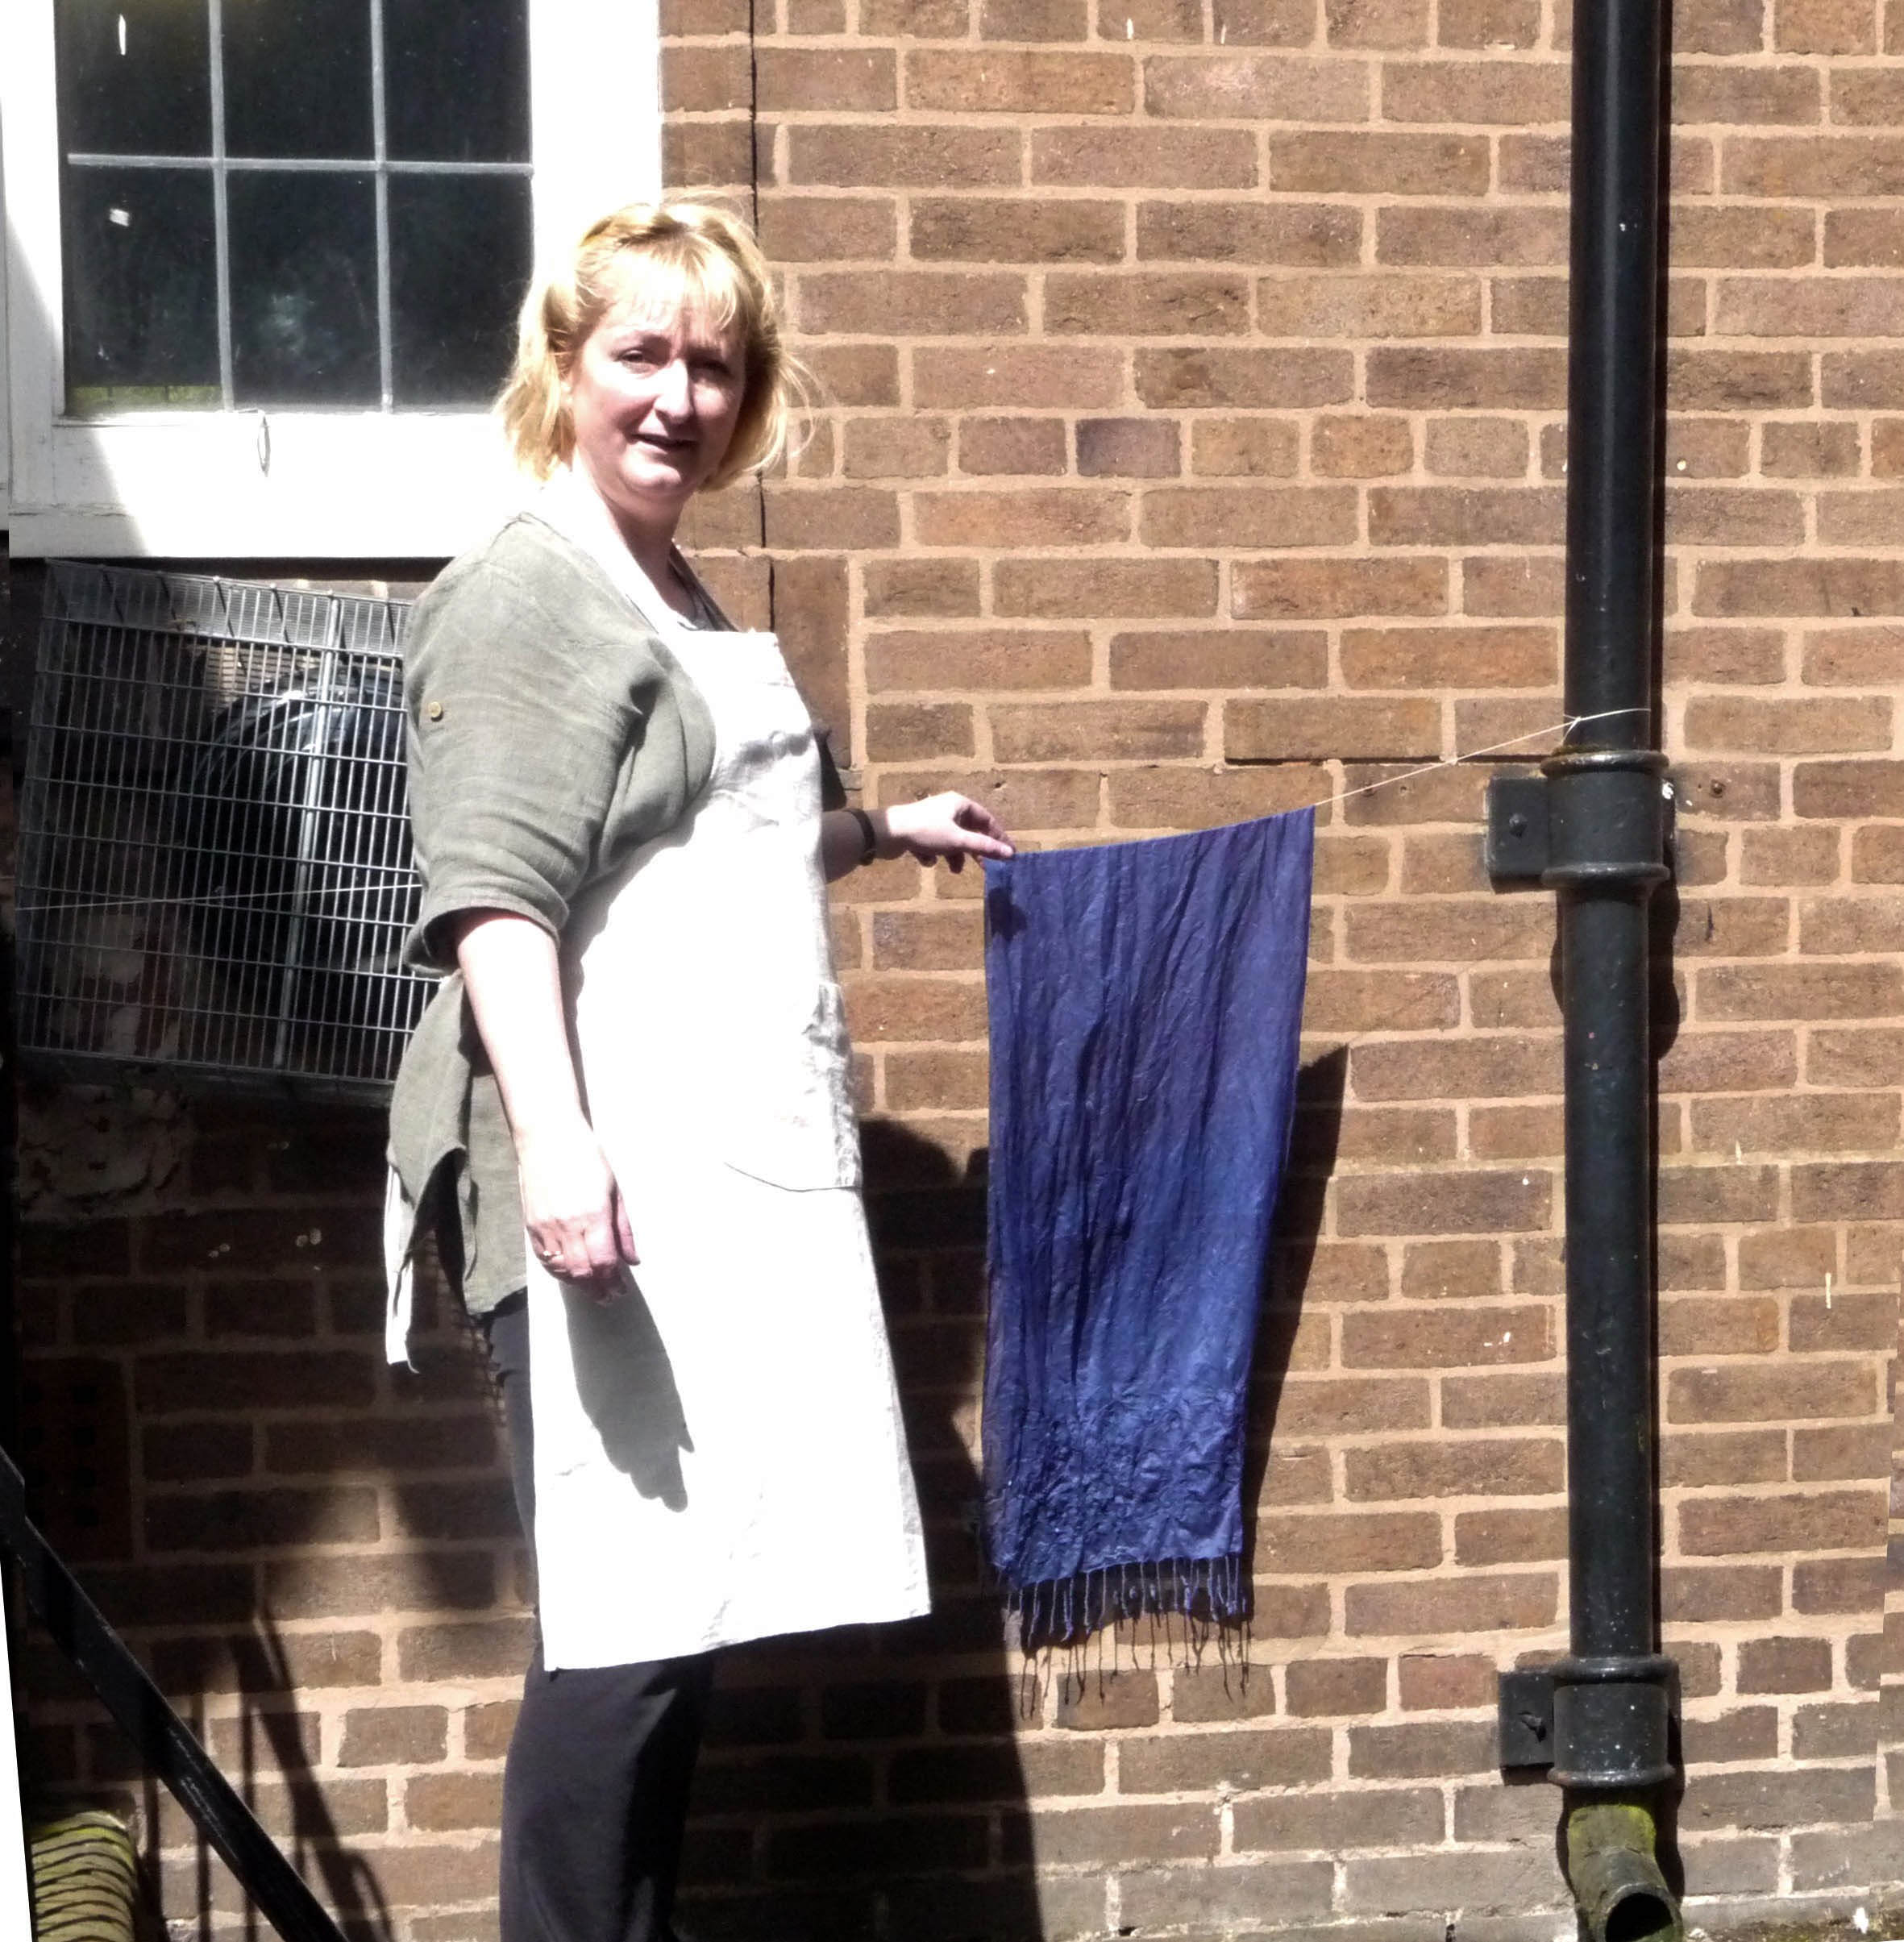 Sarah is enjoying the sunshine while waiting for her Sreepur scarf to dry